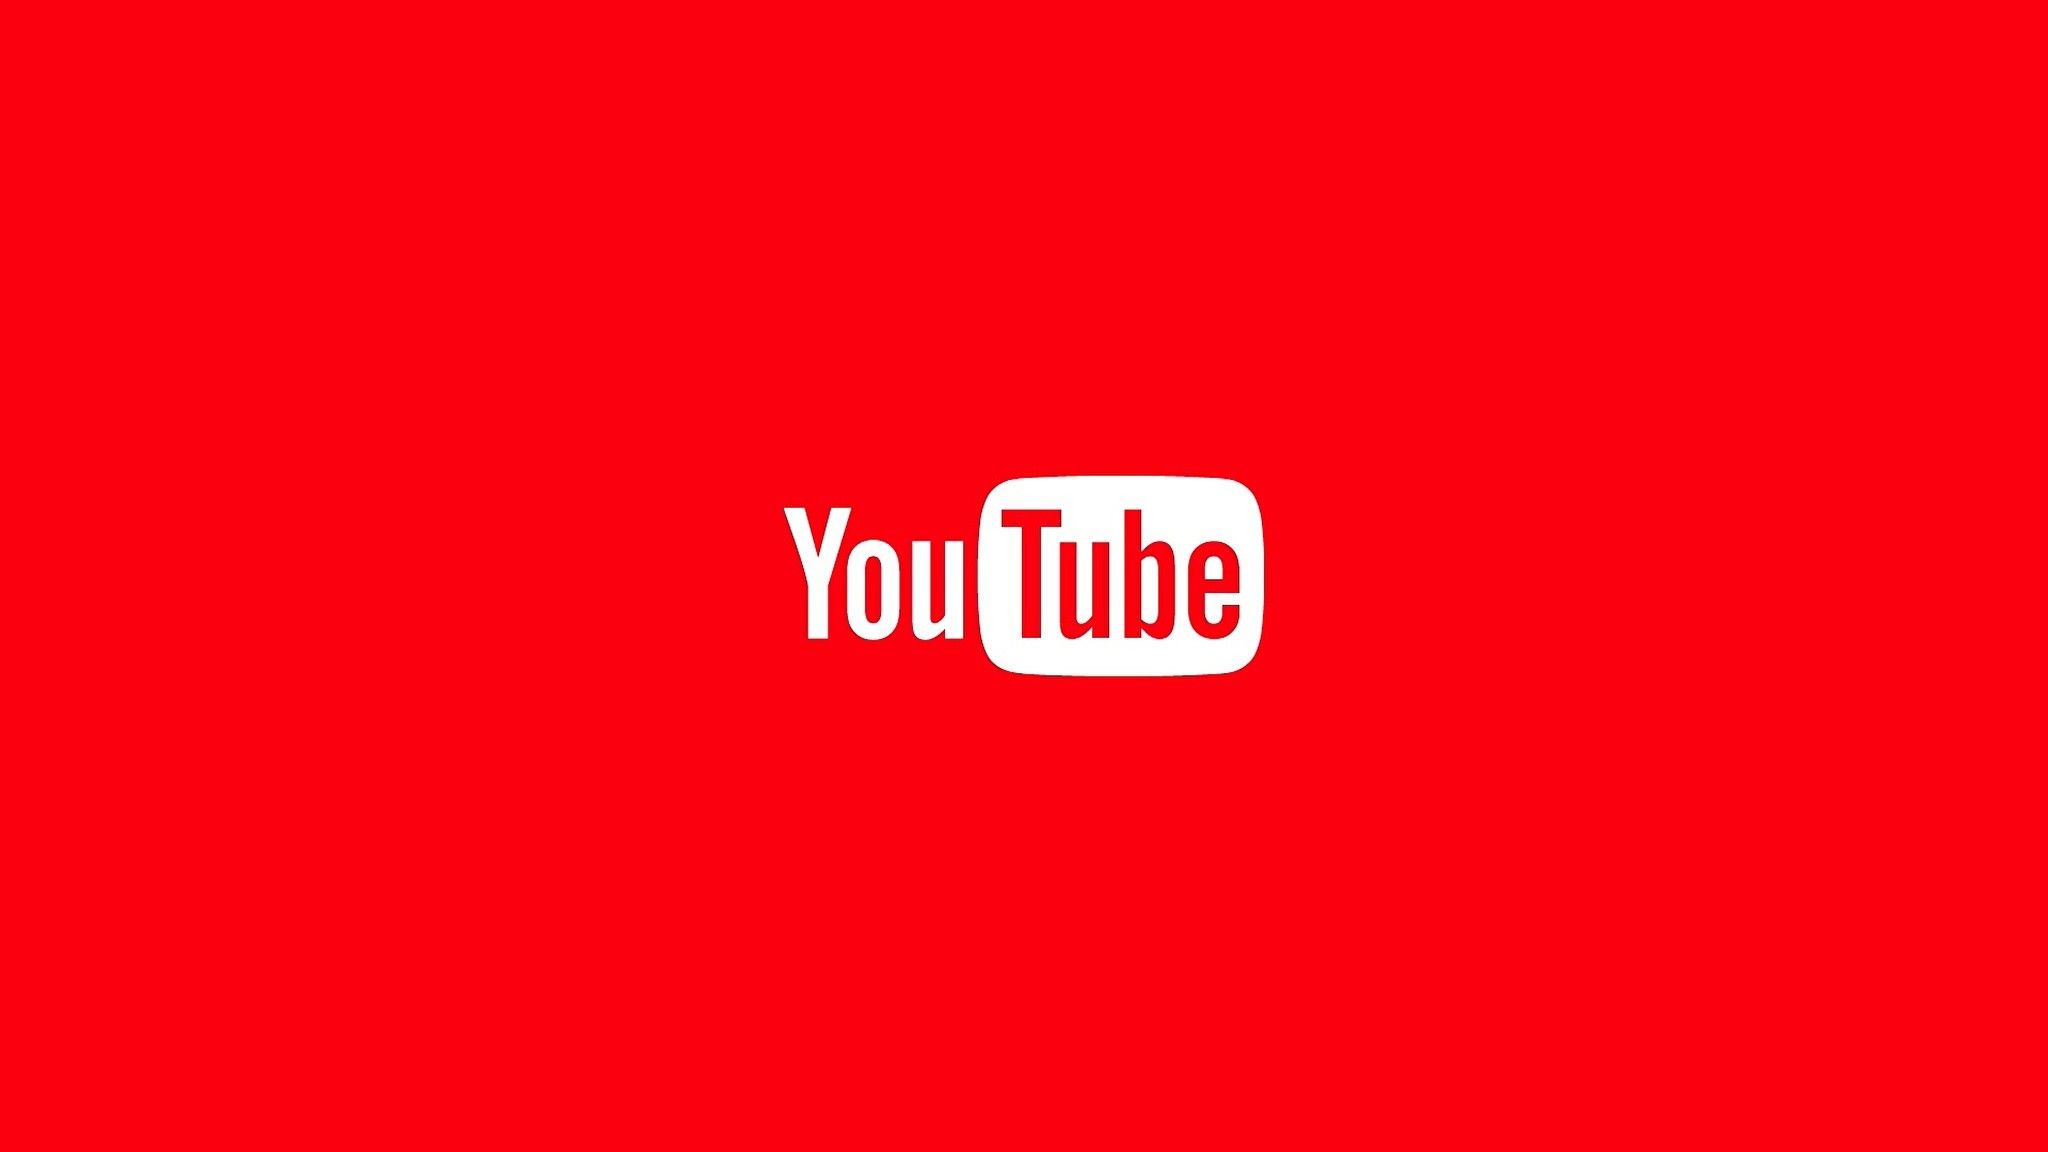 youtube banners 2048 x 1152 pixels